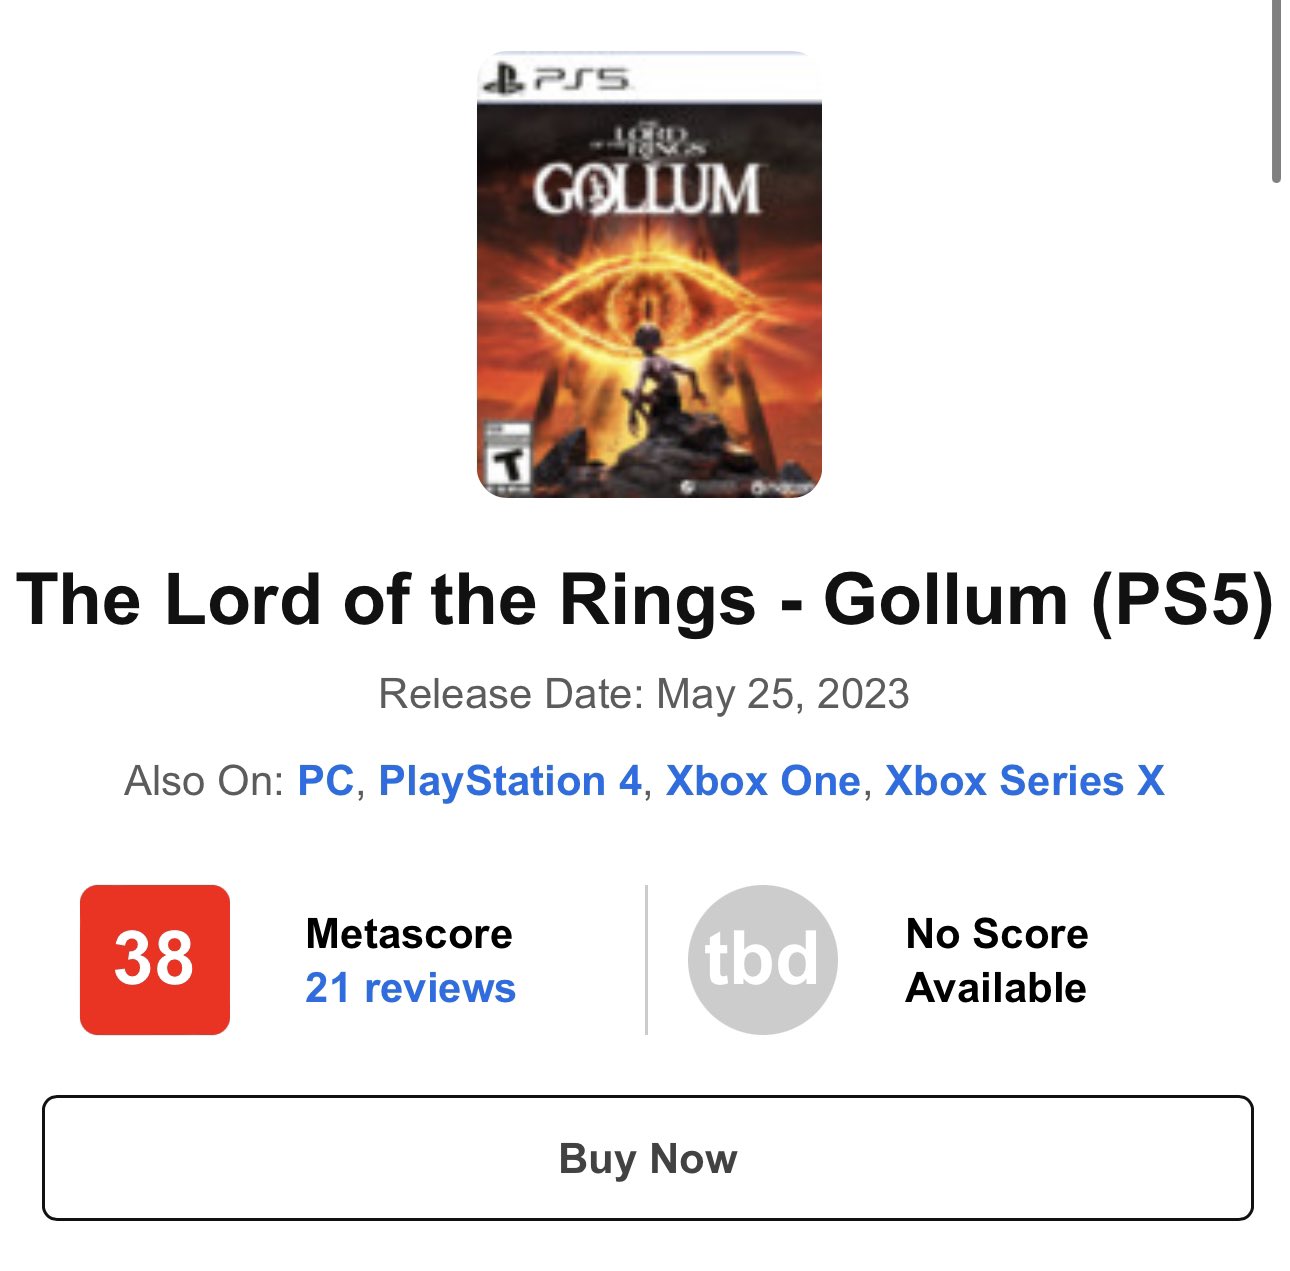 The Lord of the Rings: Gollum Is Currently The Lowest Scoring Game